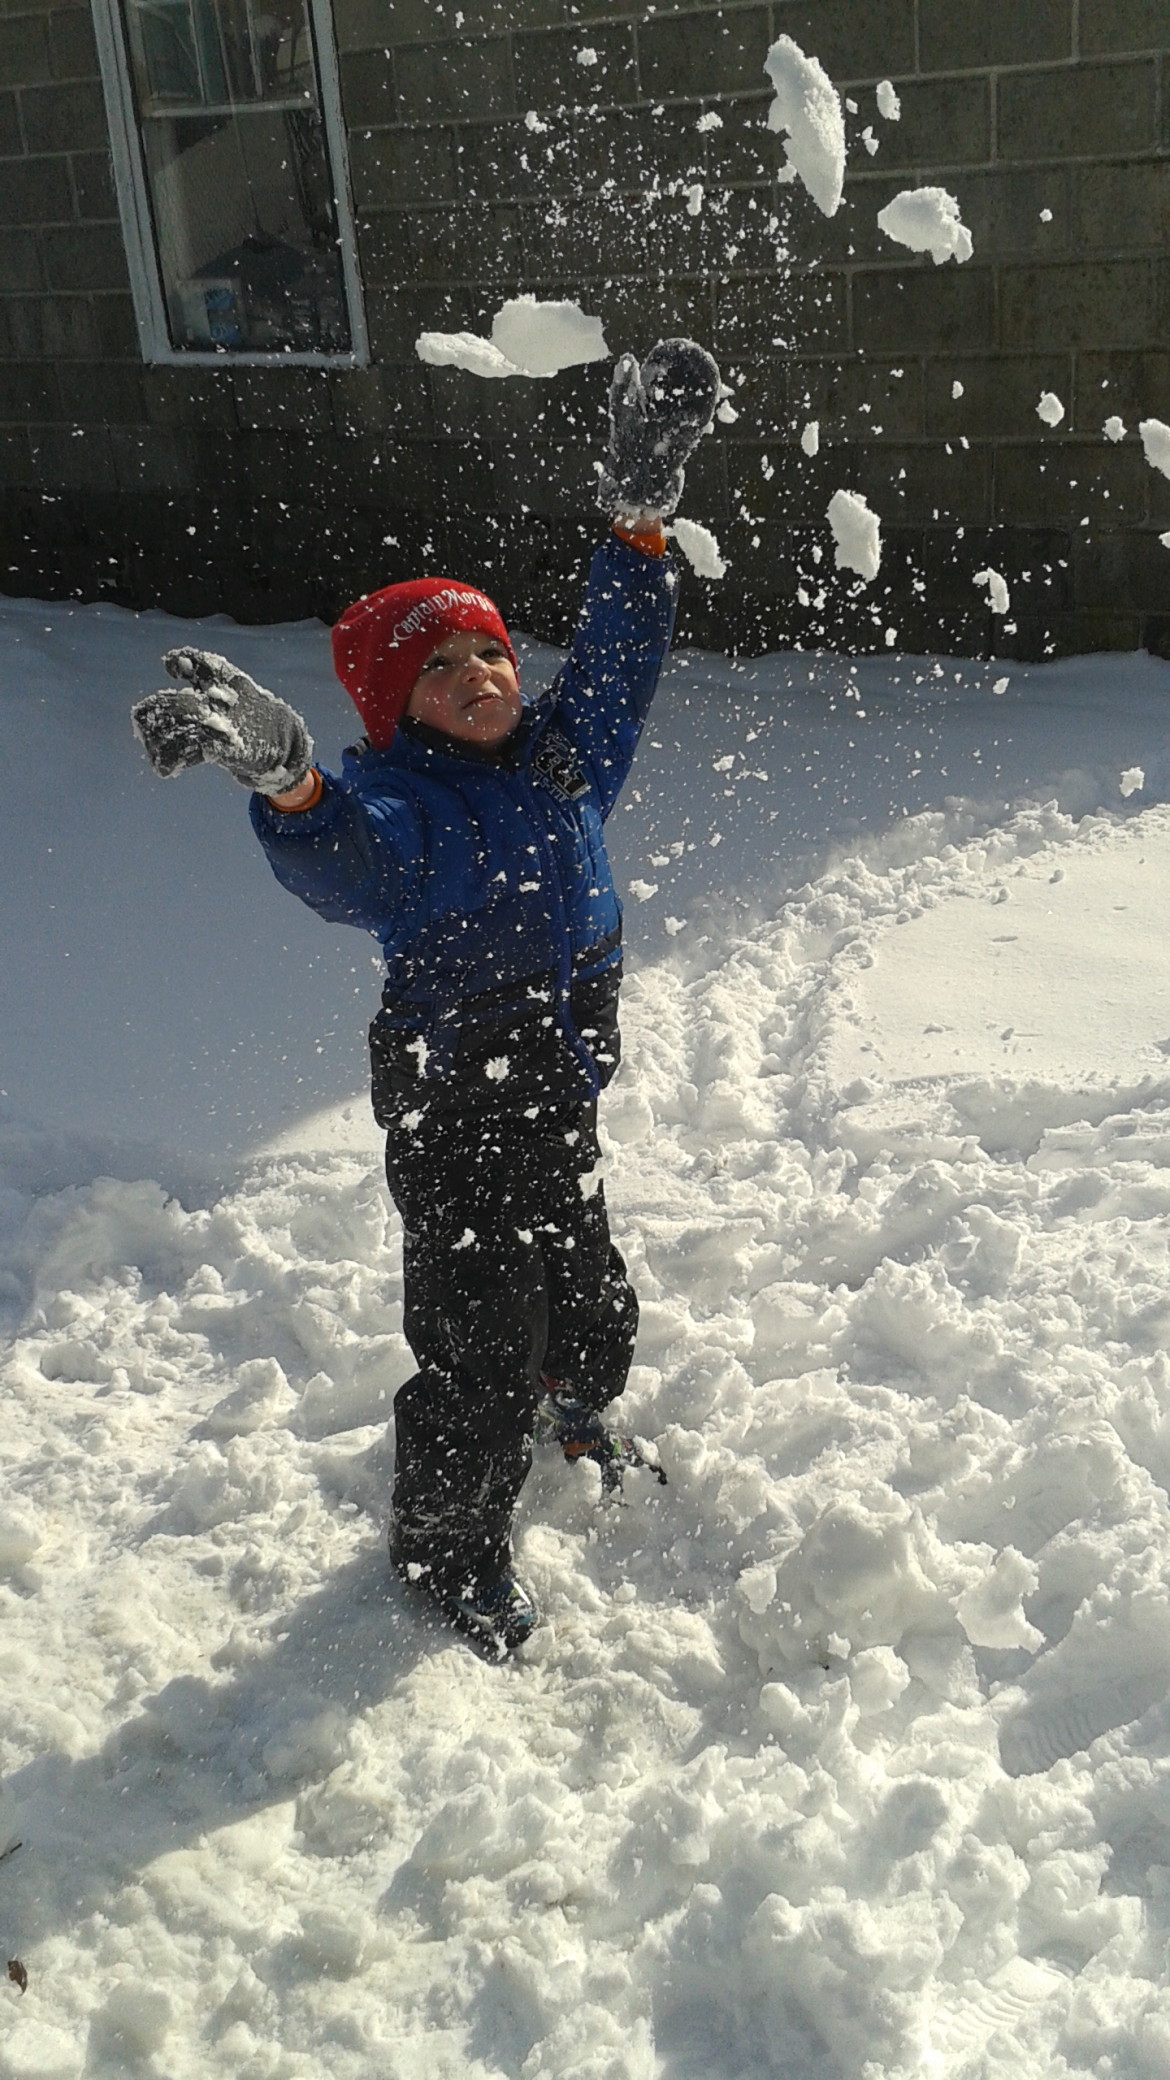 4-1/2 year old Jack plays in the snow making "snow confetti" during Monday's storm. 